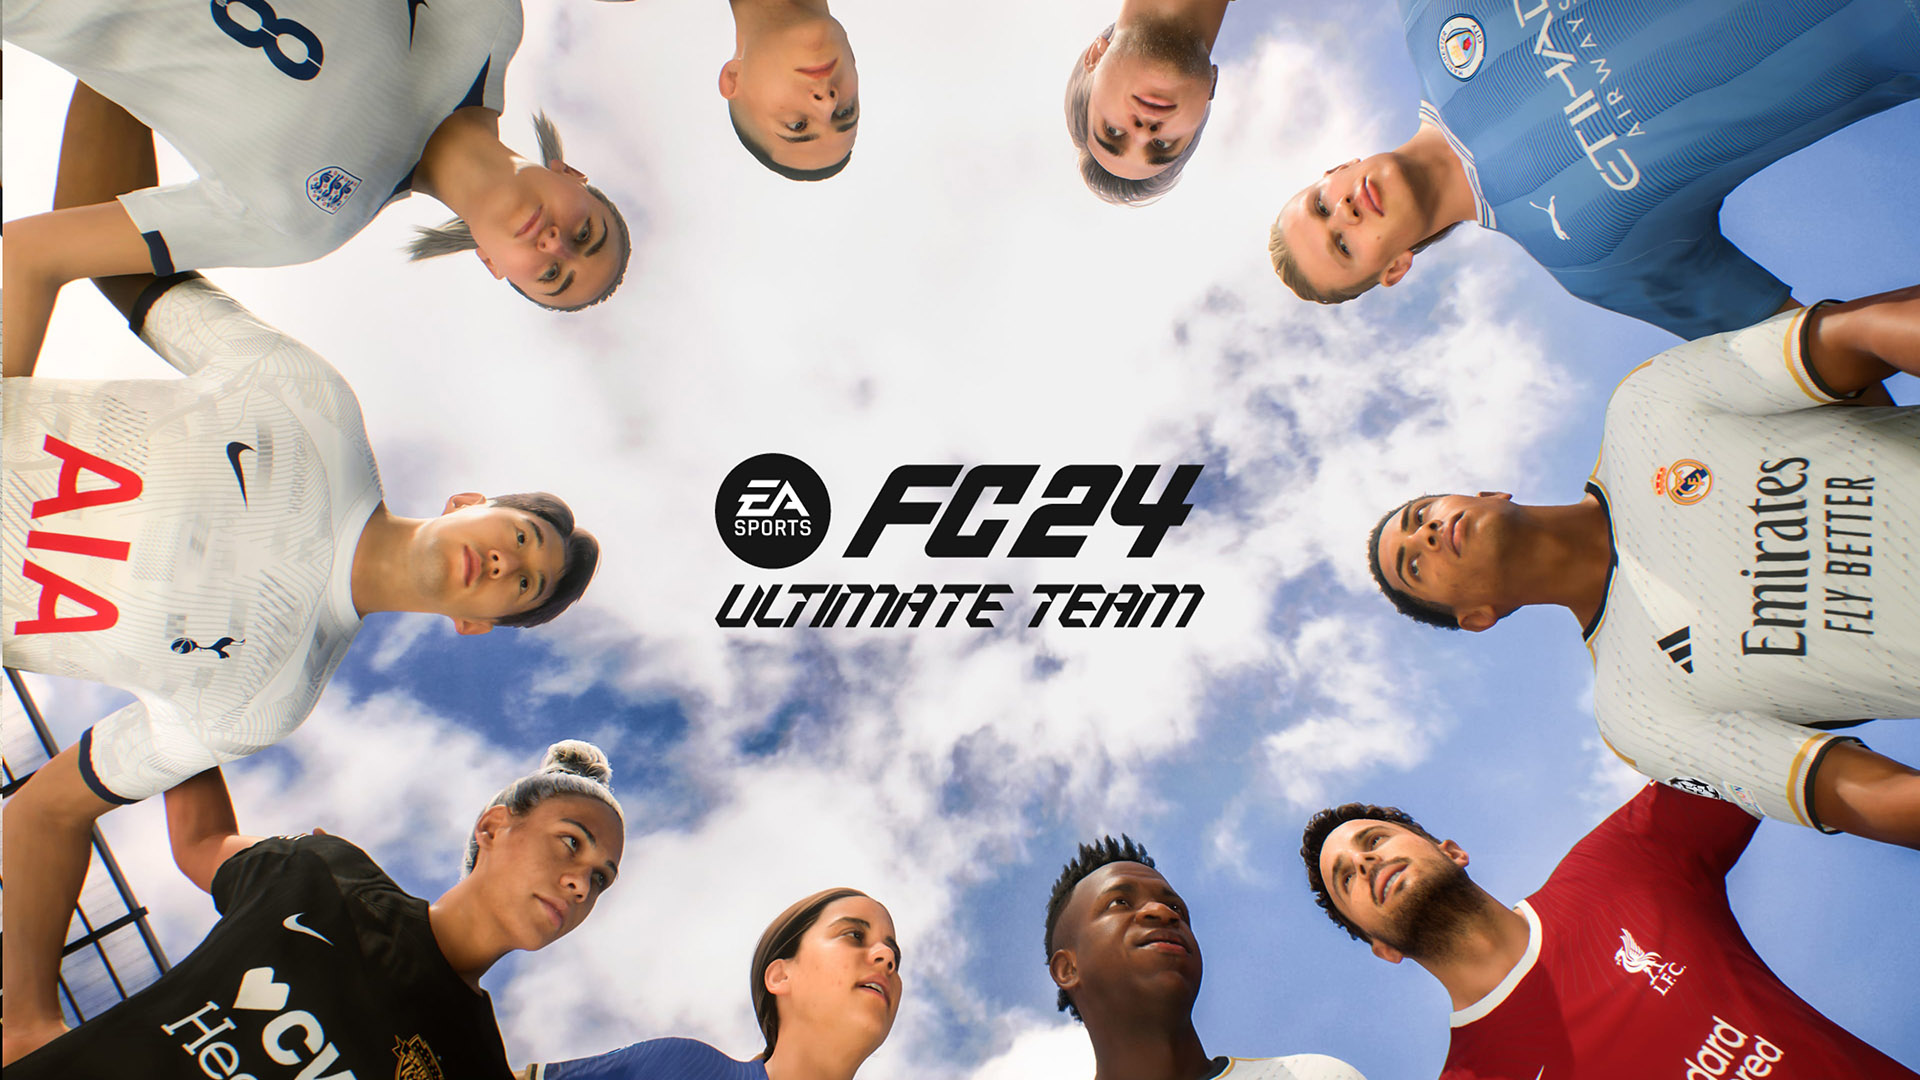 FIFA 23 Web App: Ultimate Guide to the FUT App